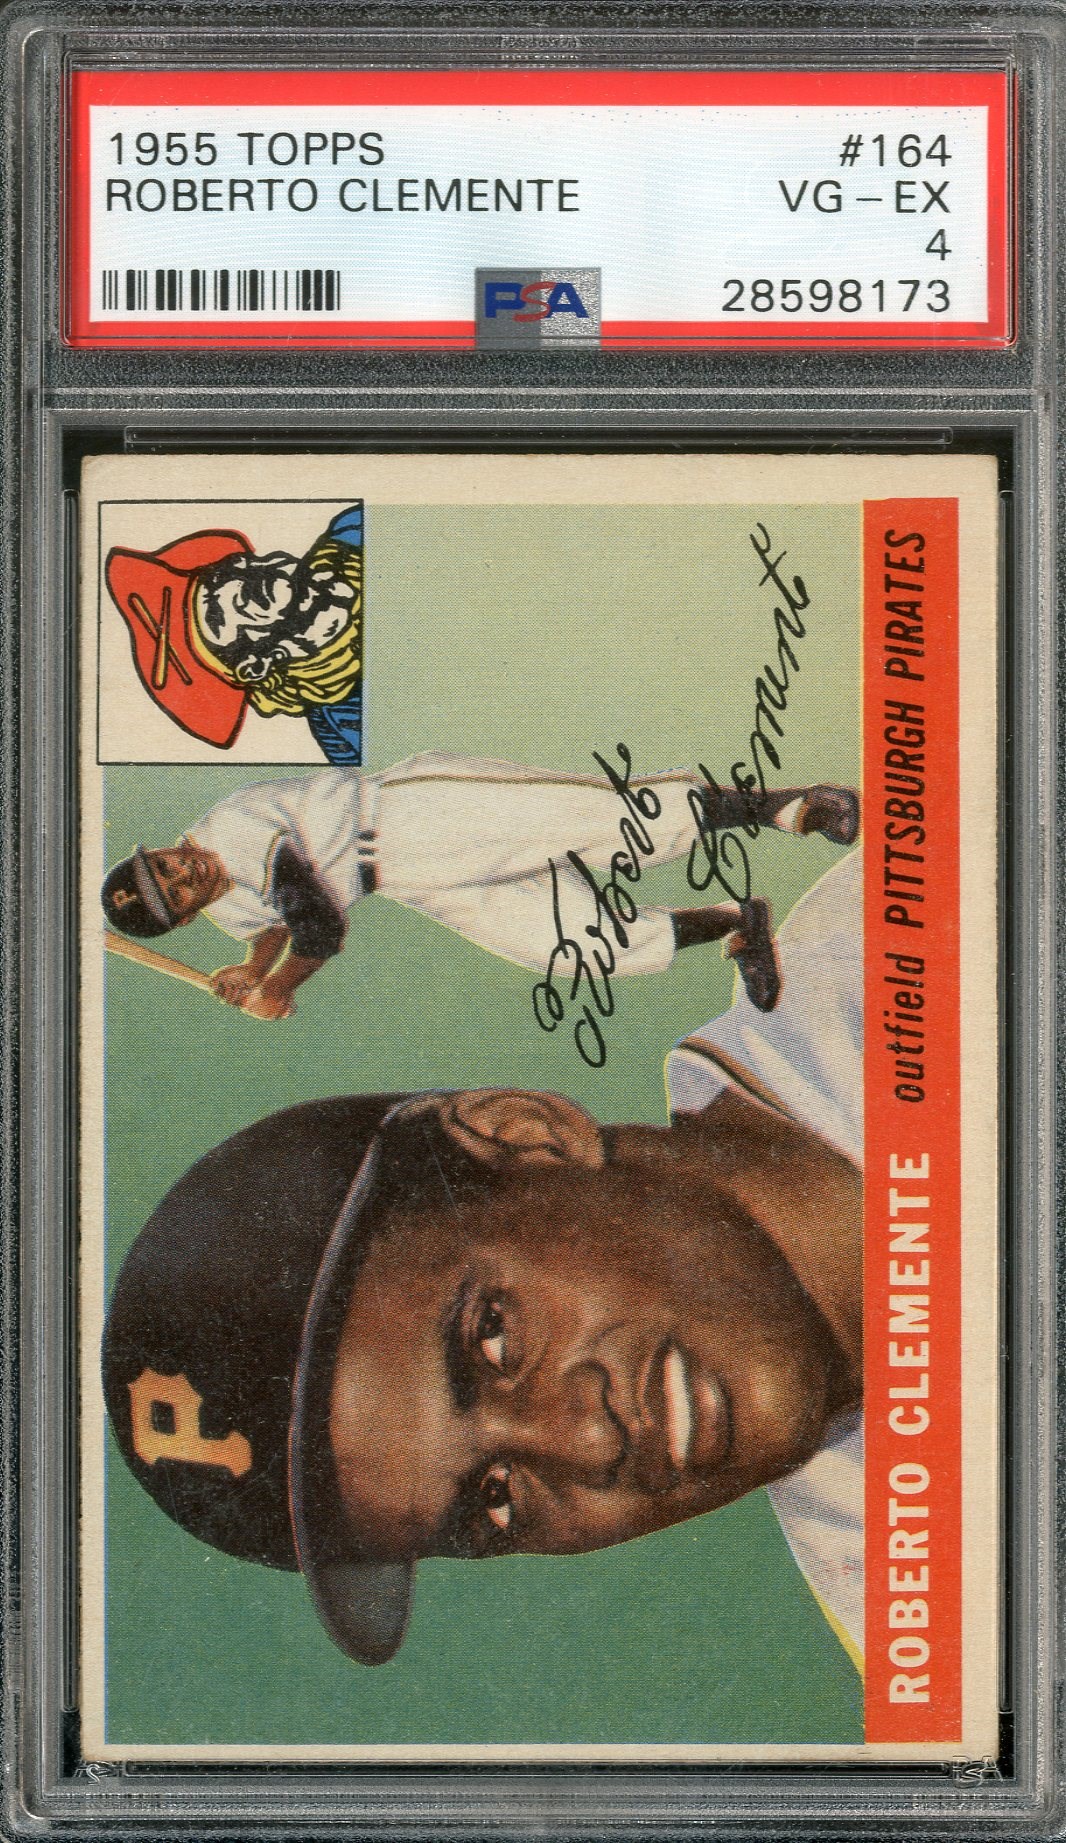 Baseball and Trading Cards - 1955 Topps #164 Roberto Clemente - PSA VG-EX 4